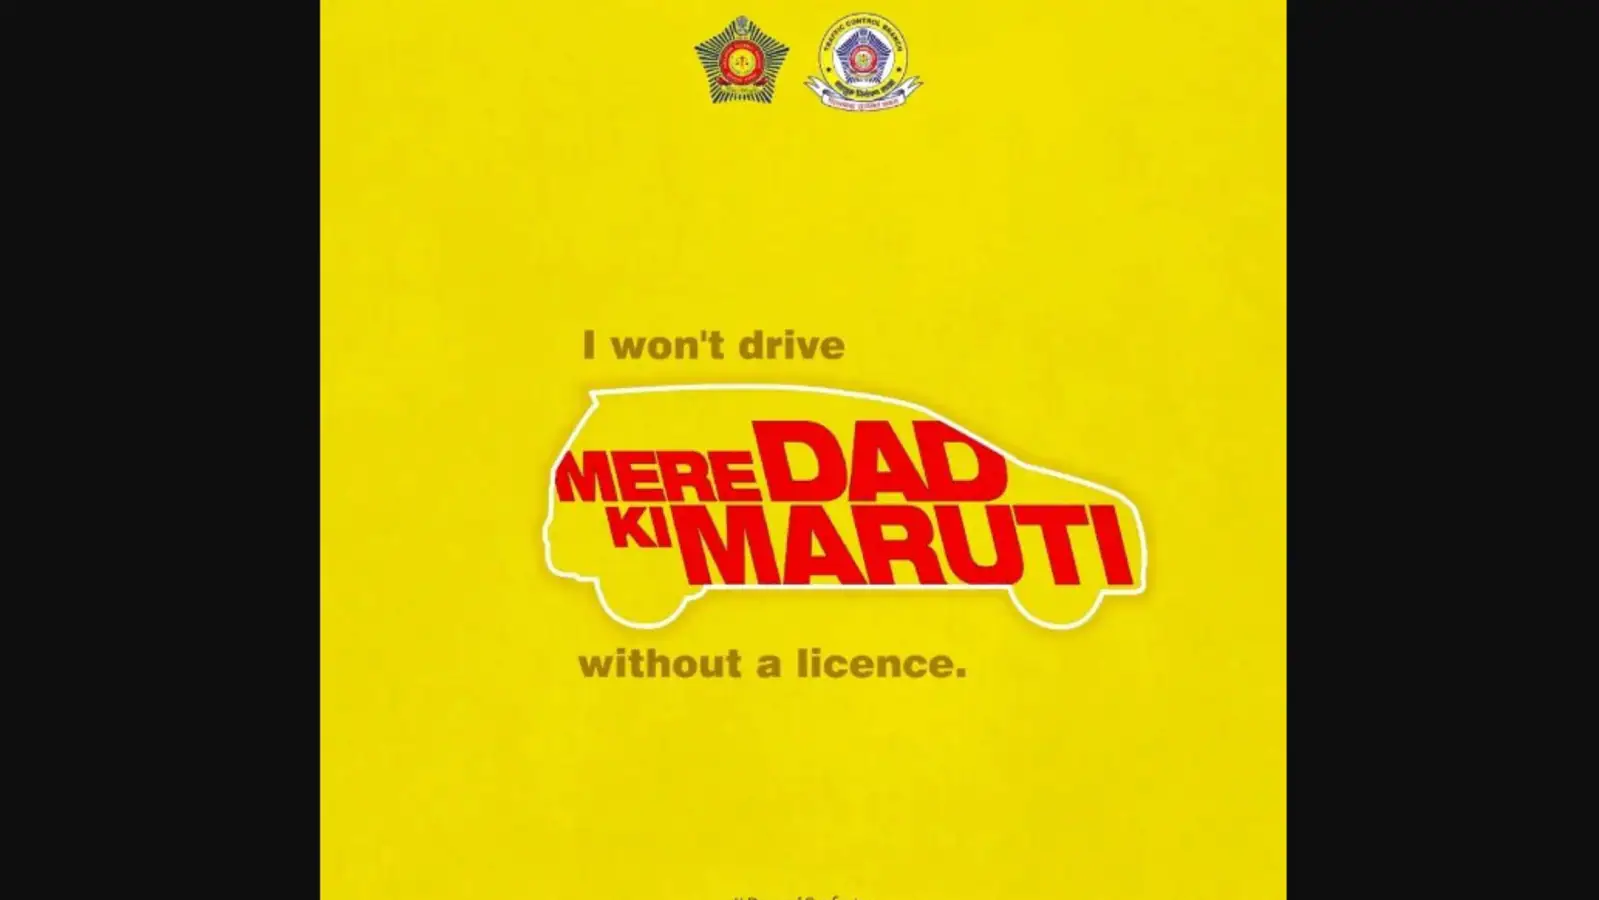 Mumbai Police creatively uses Hindi film titles to talk about road safety